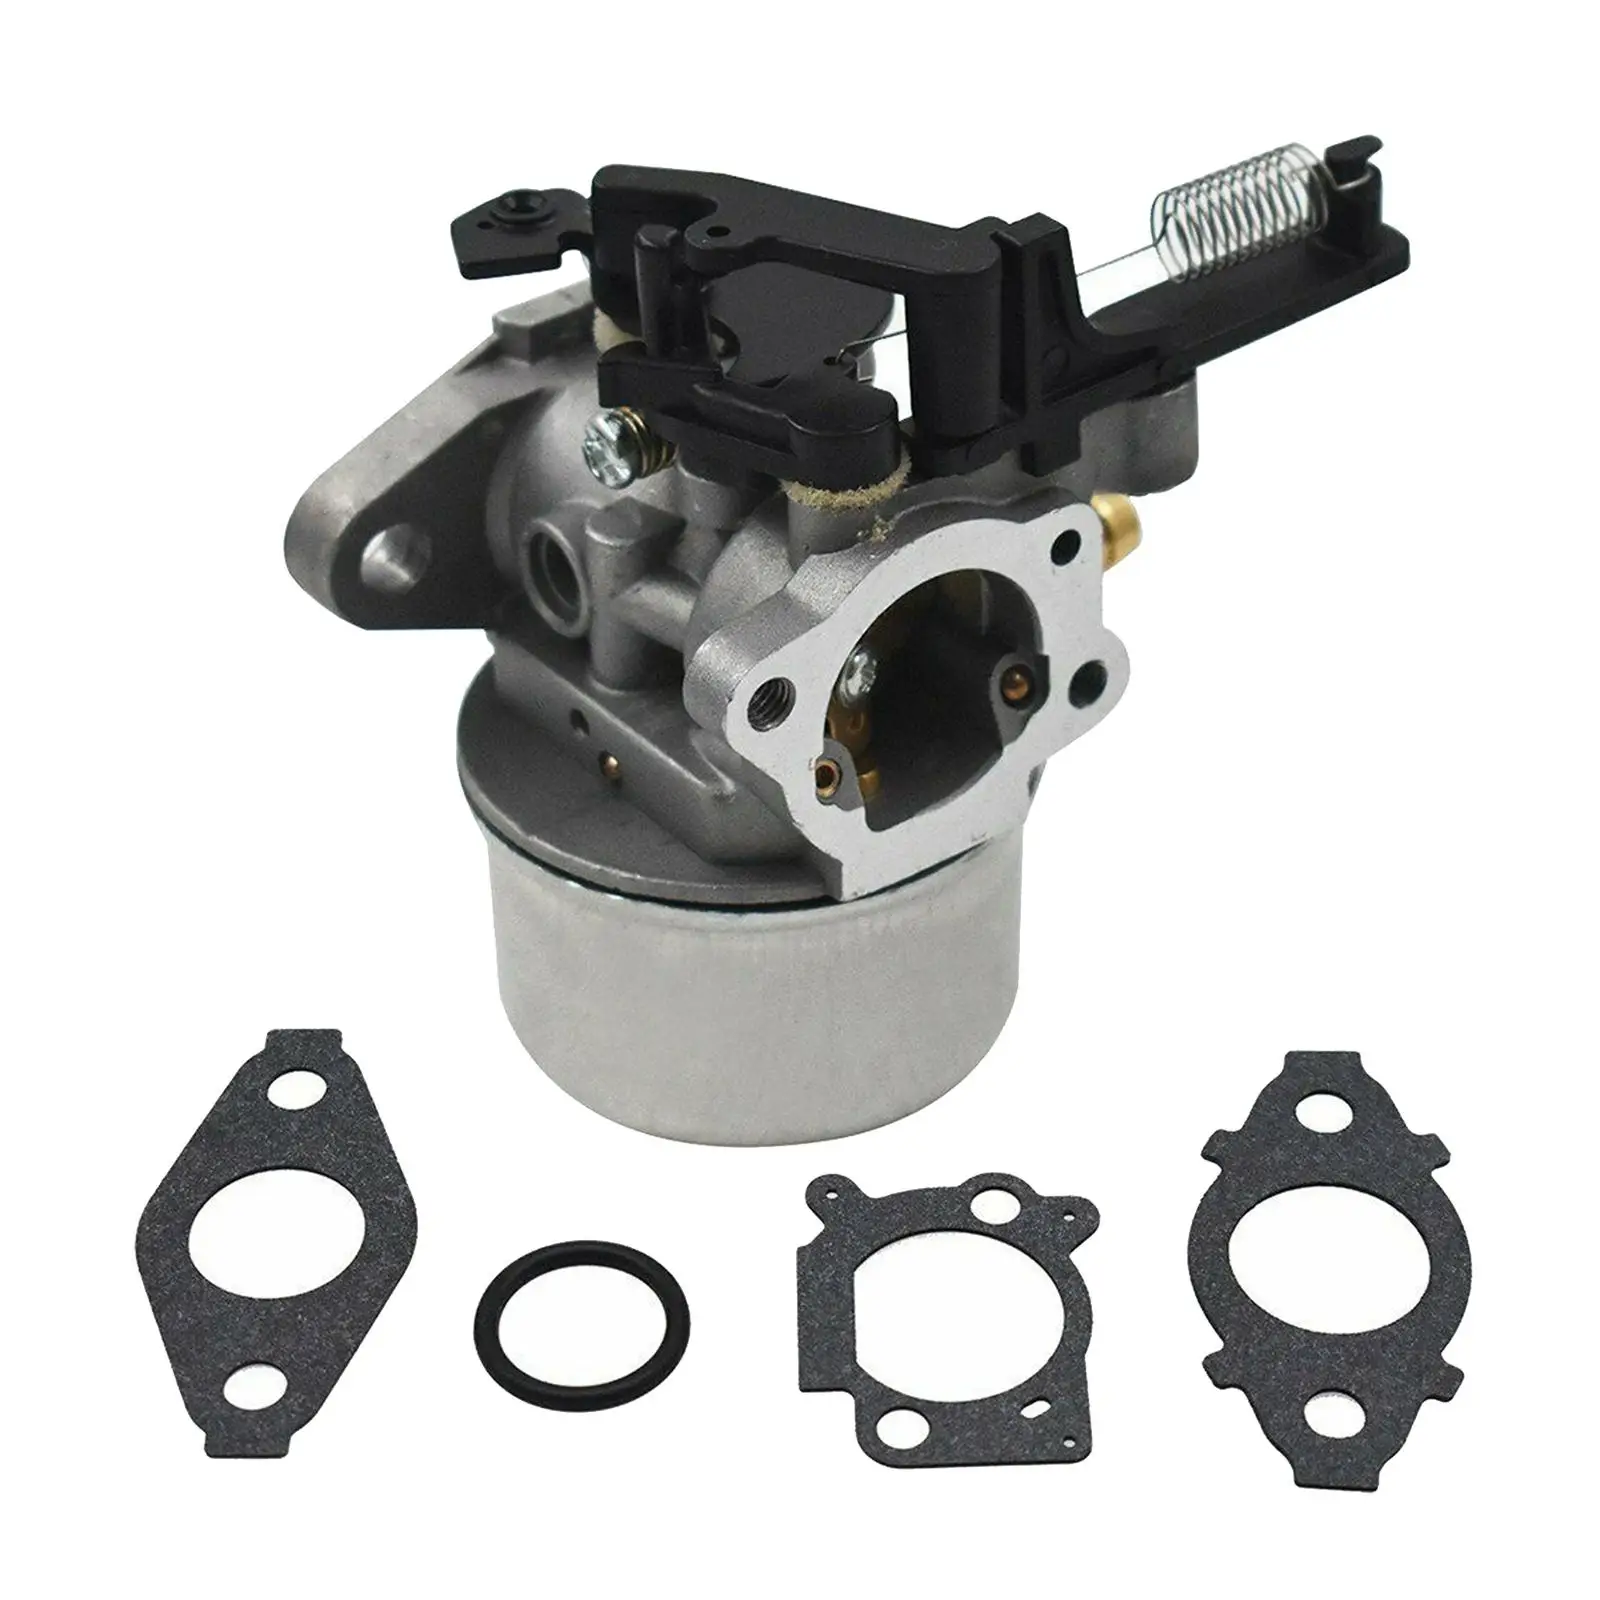 Carburetor for 591190948 Engines Lawn Mower 2700Psi 3000Psi Troy- Pressure Washer, Quality, Very Durable